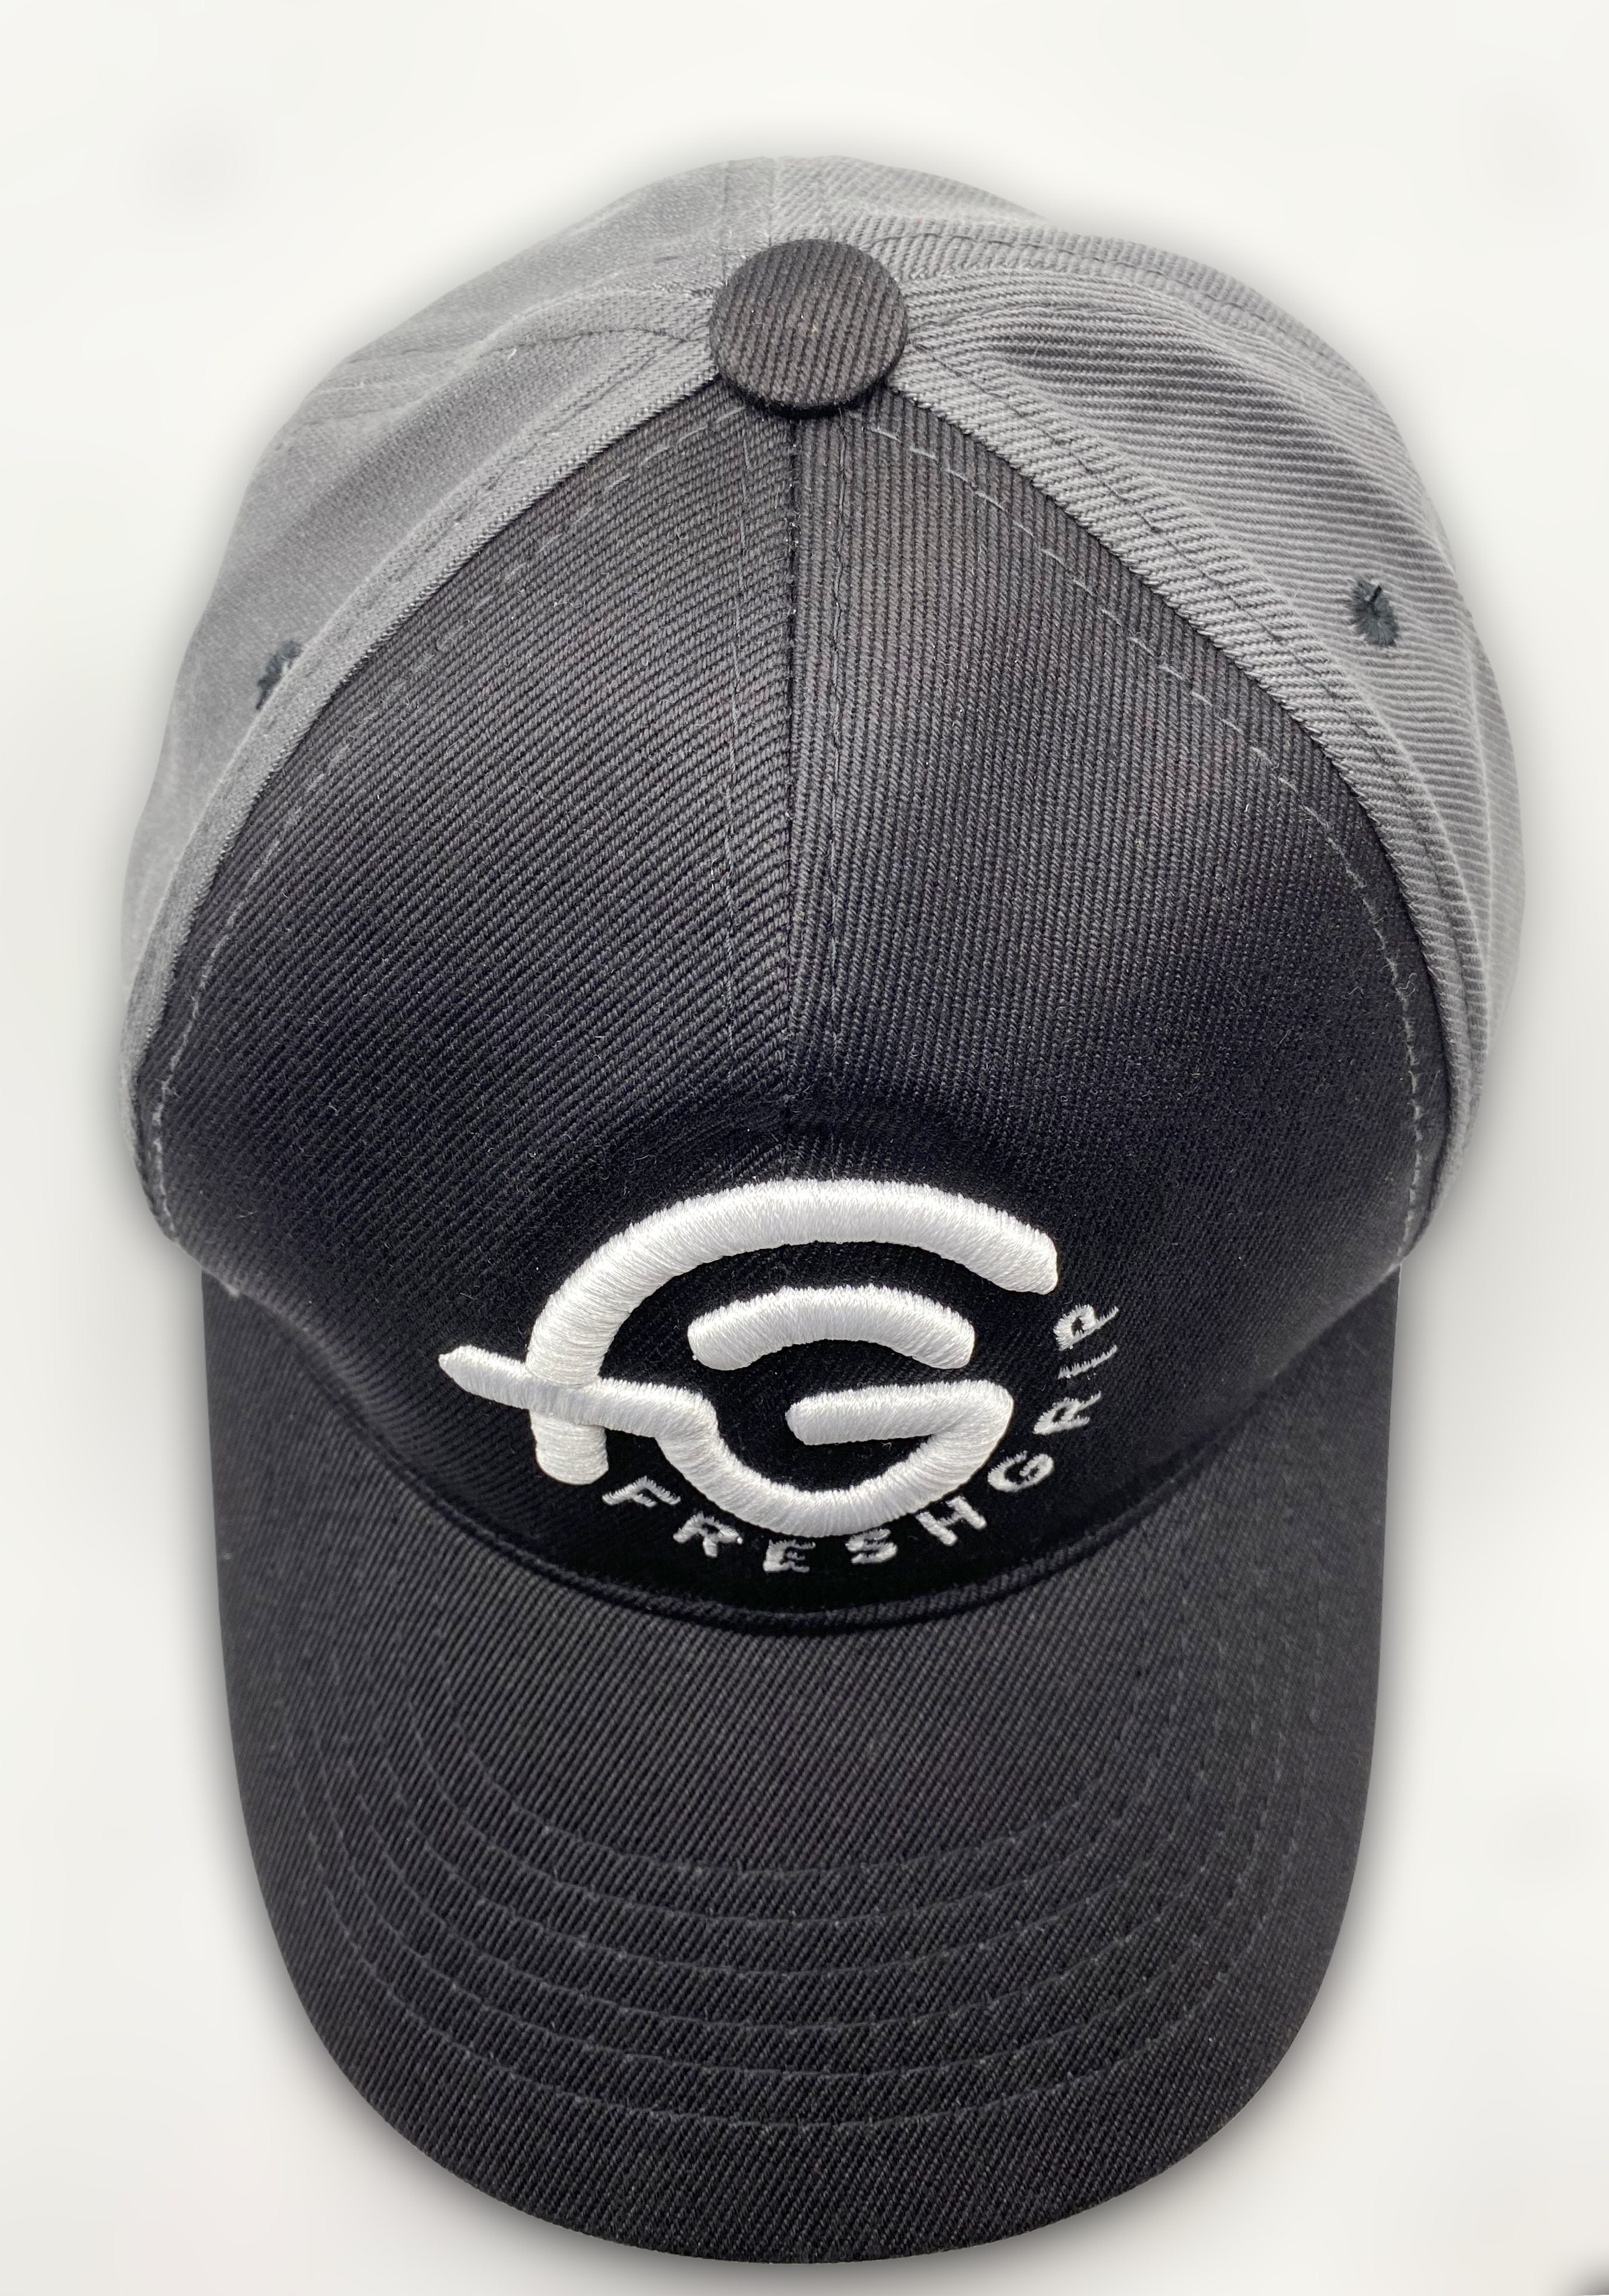 Classic black and grey sports cap for the golf course